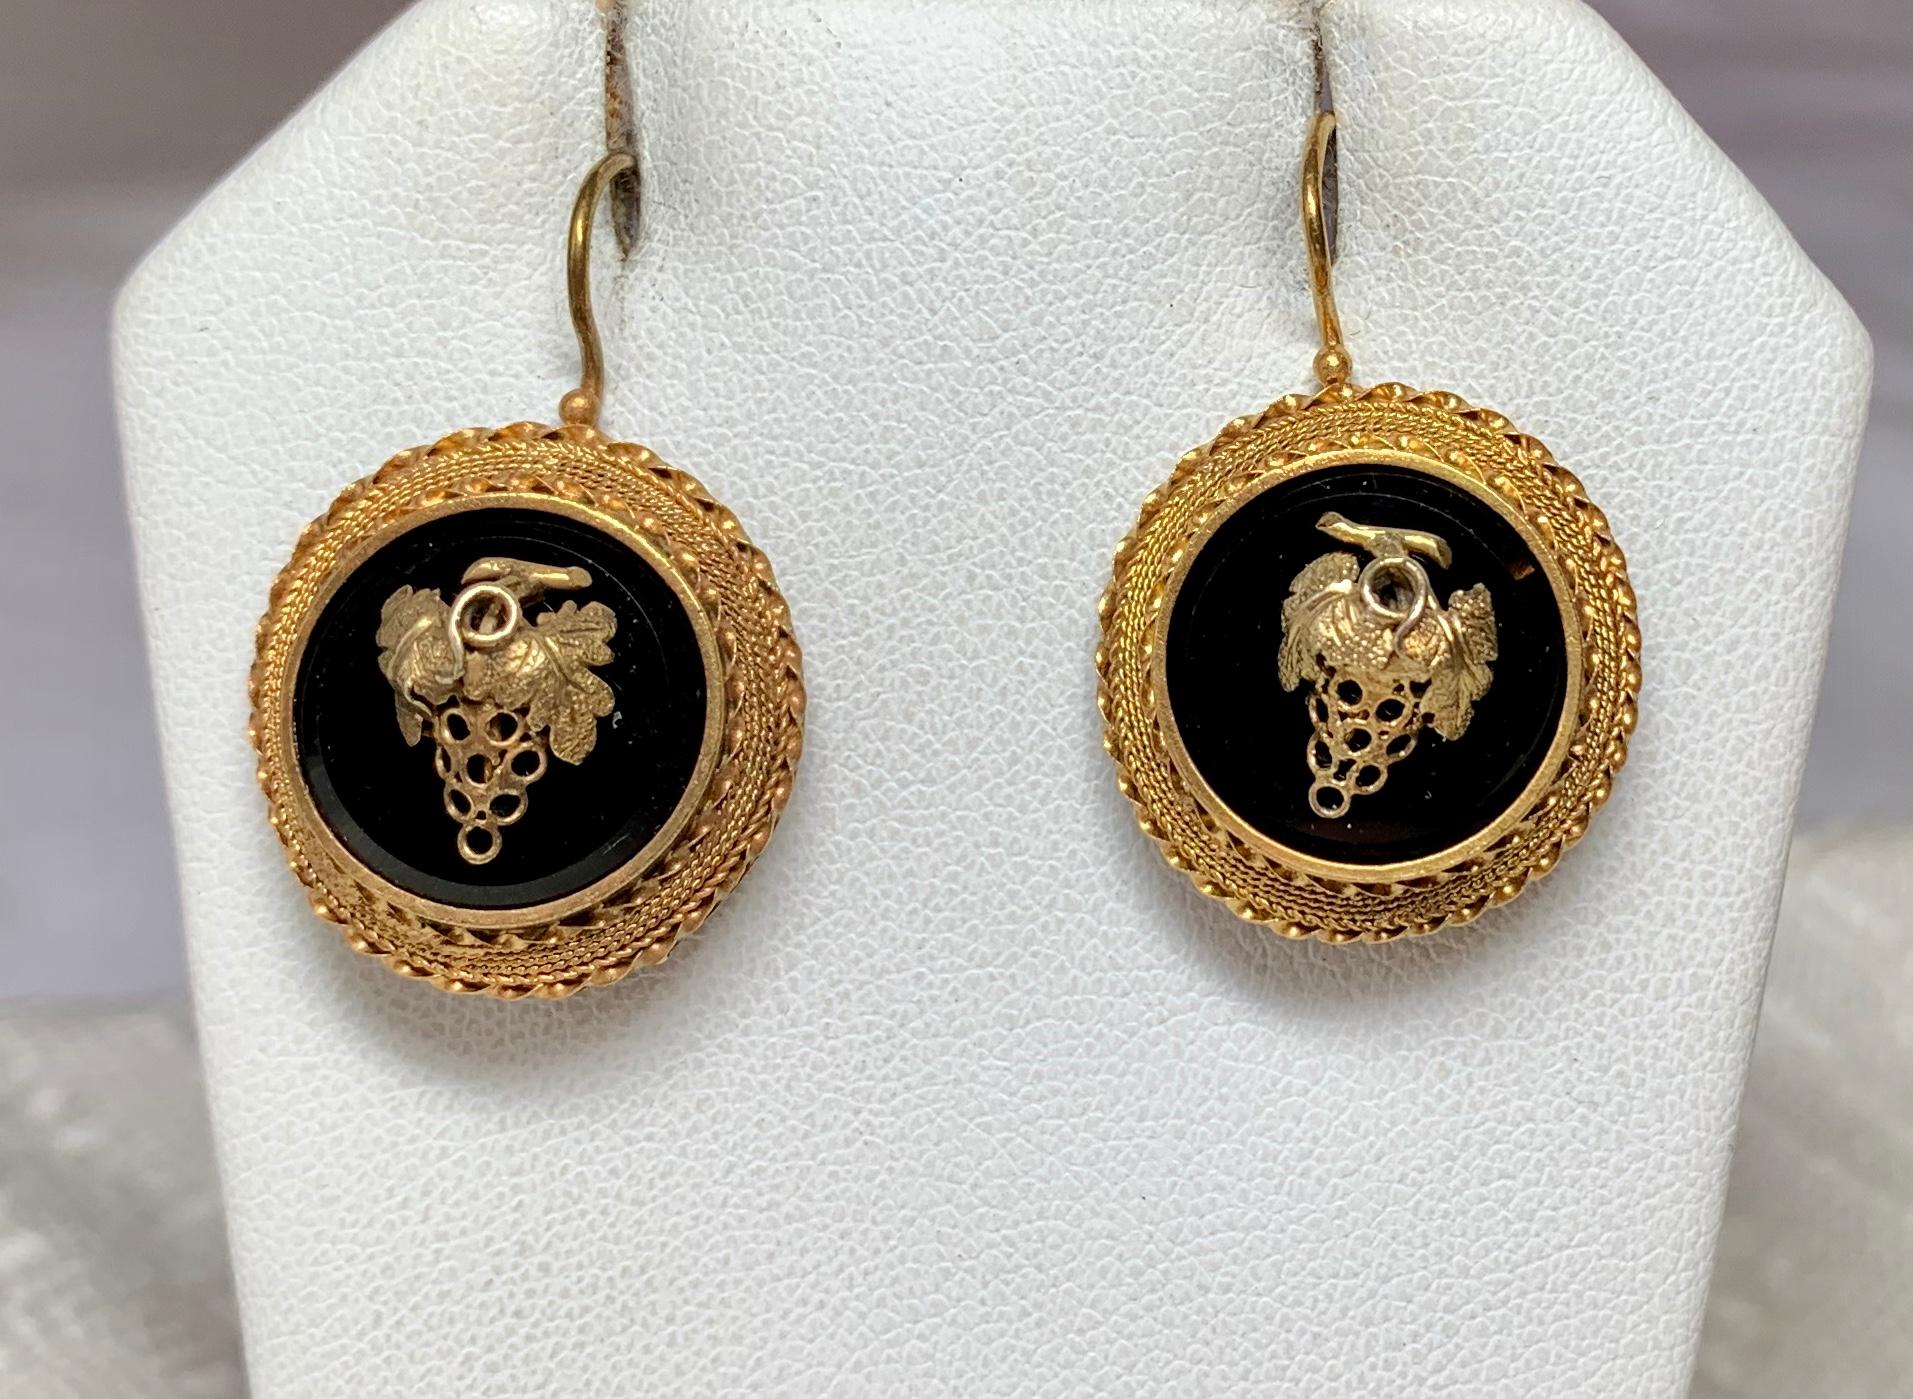 Victorian Grape Earrings Pendant Suite 14k Gold Black Onyx Etruscan Revival 1870 In Good Condition For Sale In New York, NY